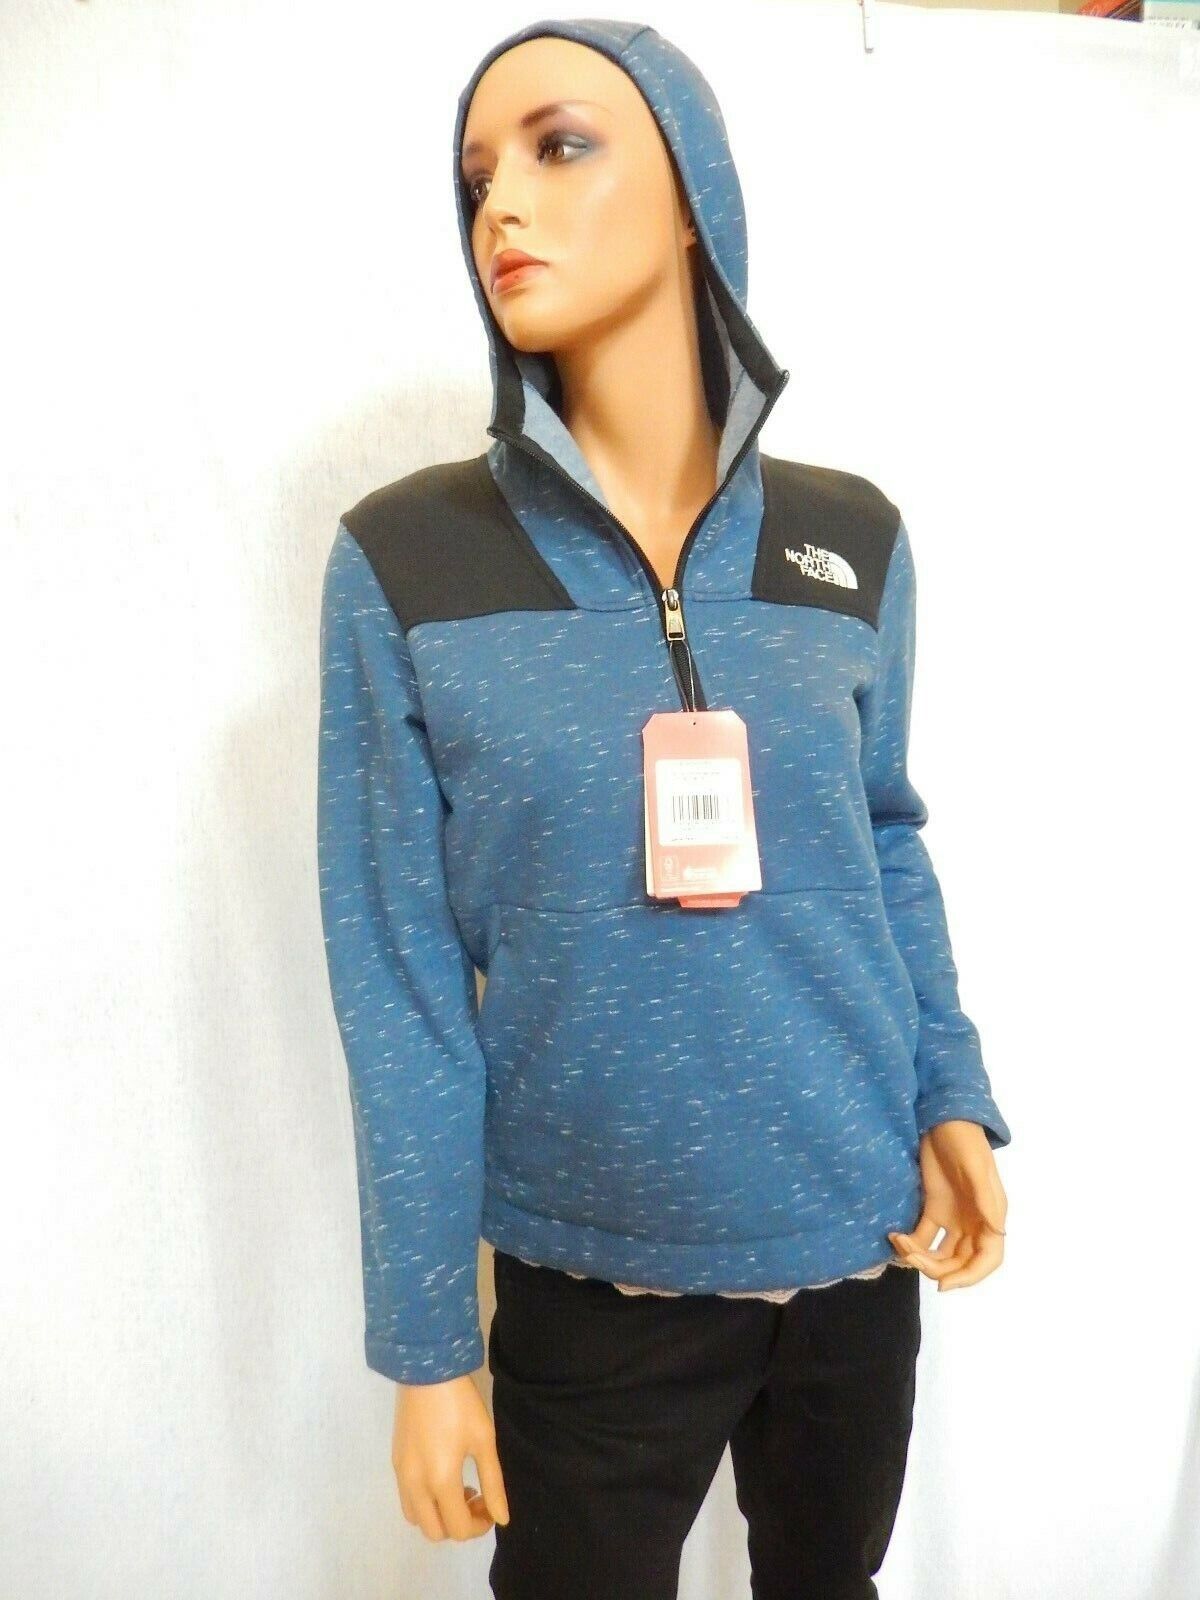 *NWT* $65 The North Face Boys Linton Peak Anorak Jacket Blue Hooded Size L